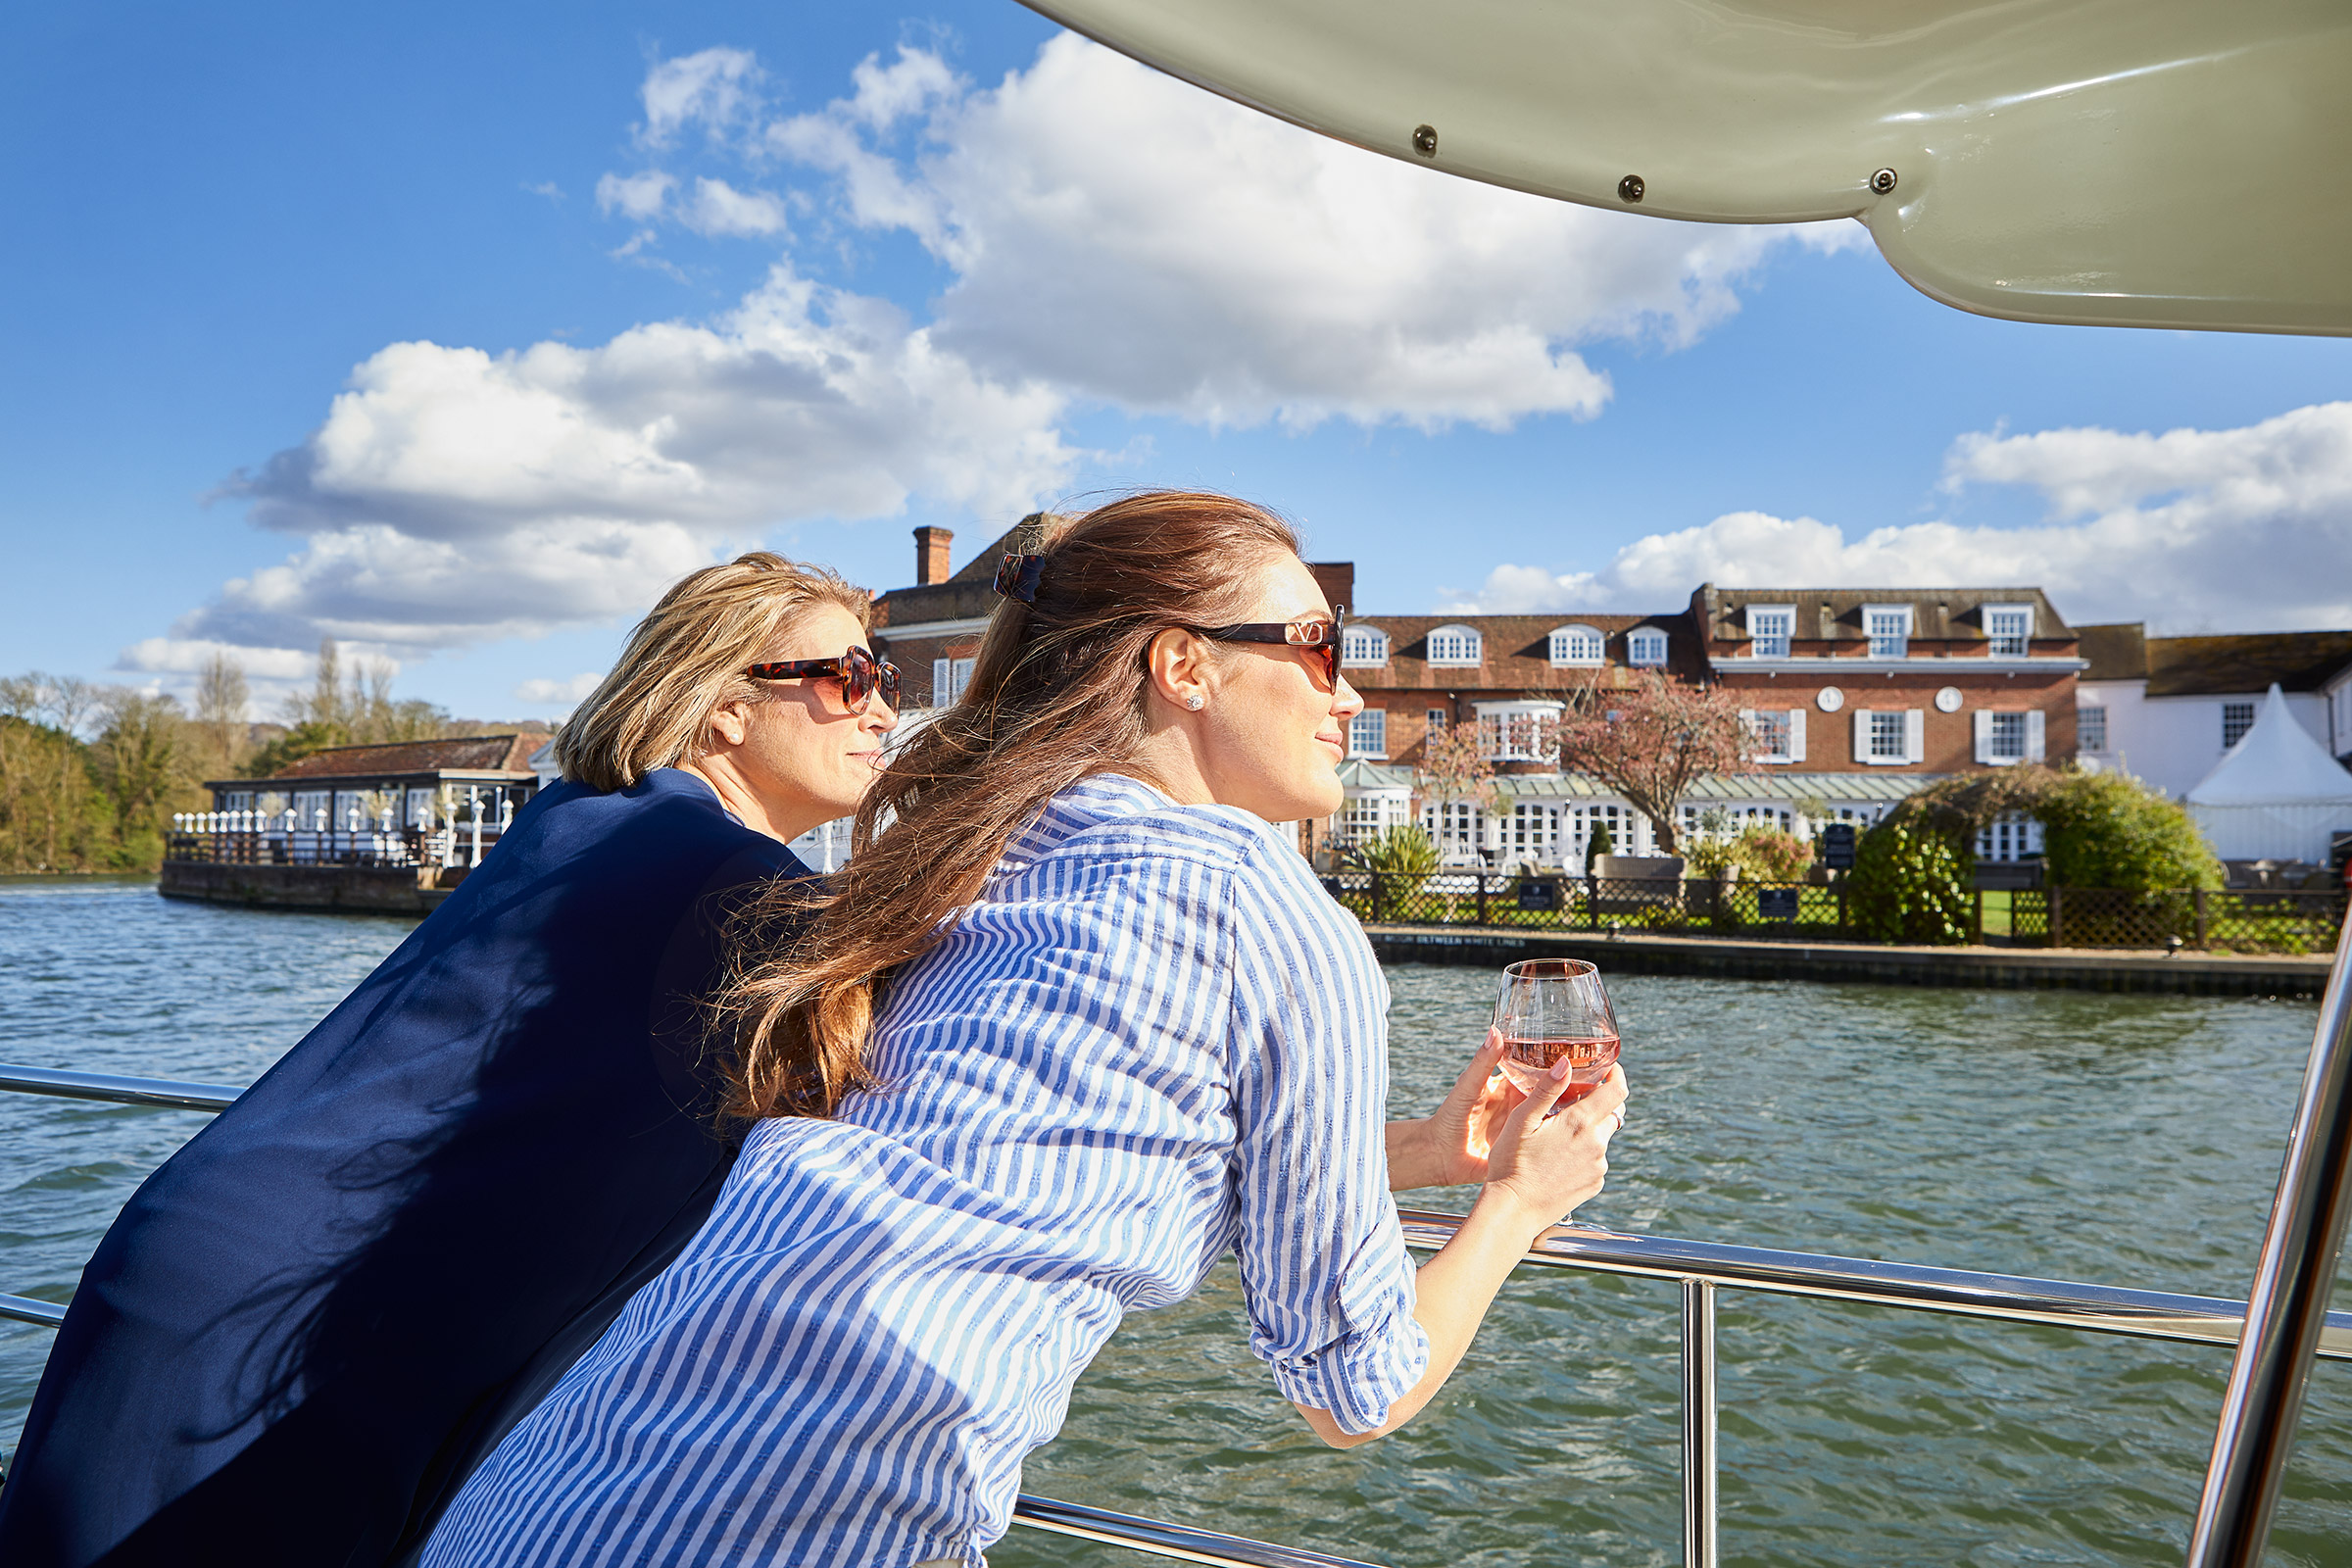 Boat Sail past Compleat Angler, Marlow, hotel and travel photographer, travel and lifestyle photographer